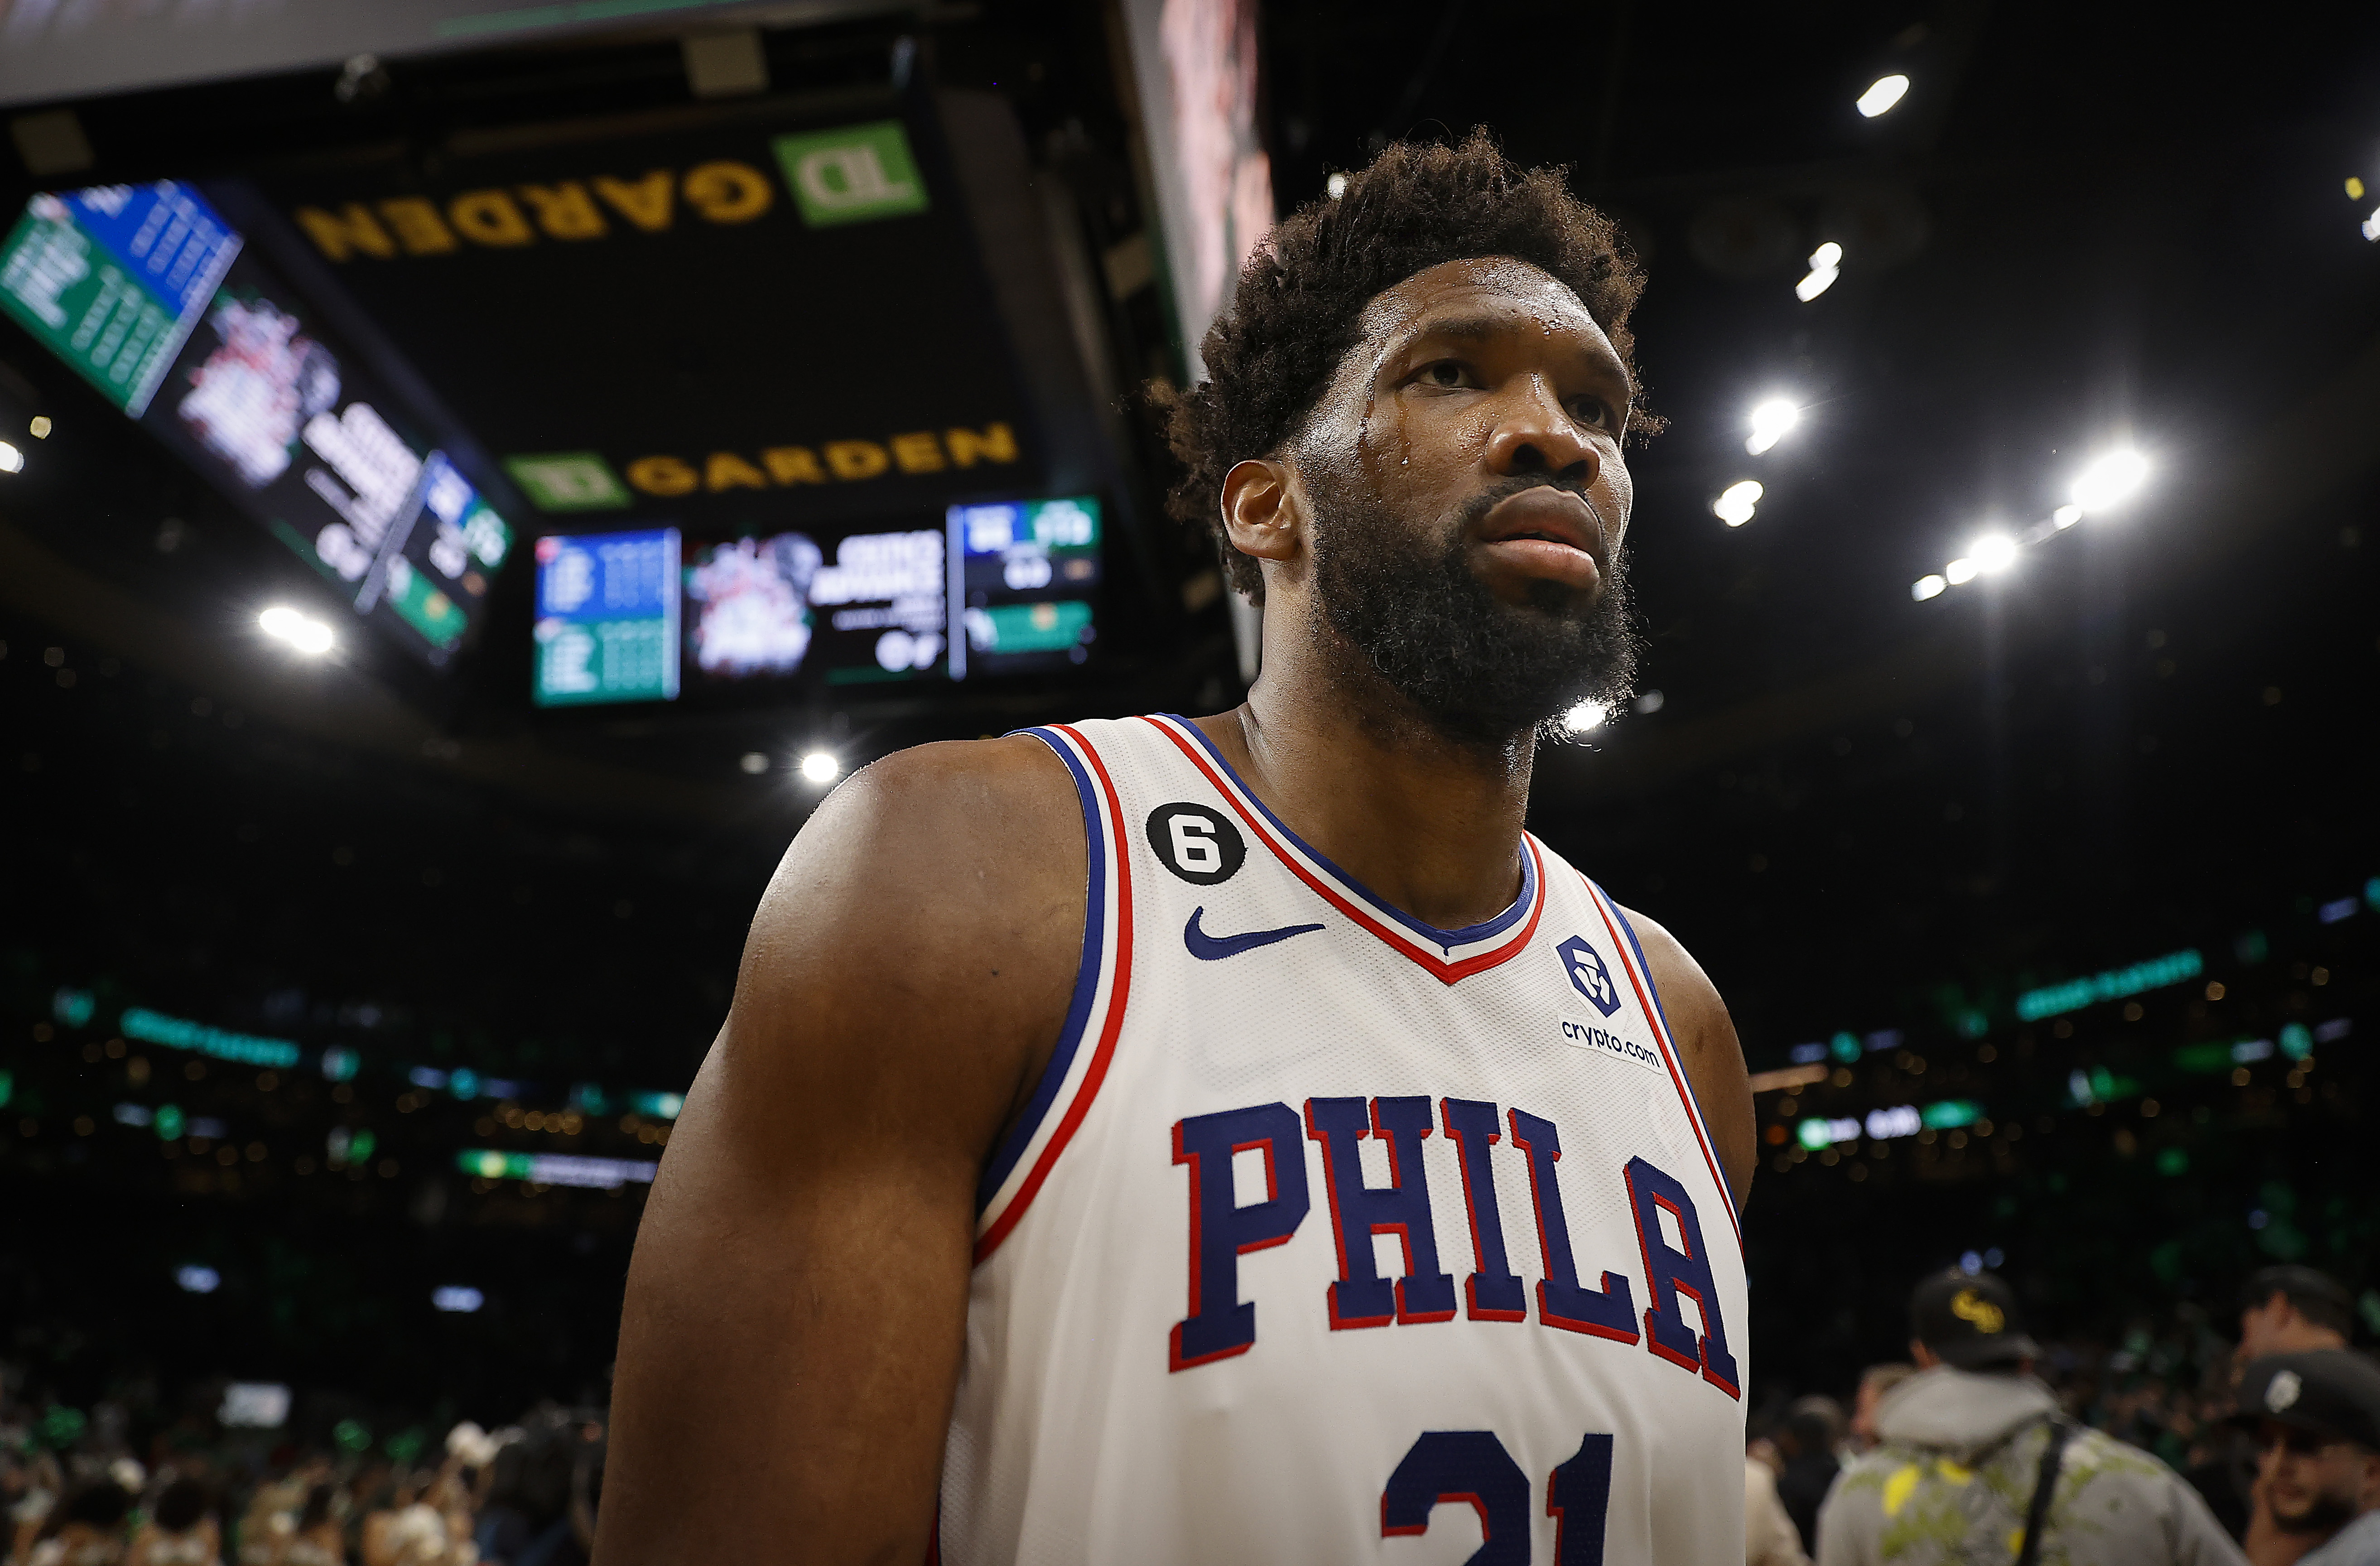 Nuggets Fans Troll Joel Embiid With Hilarious Missing Person